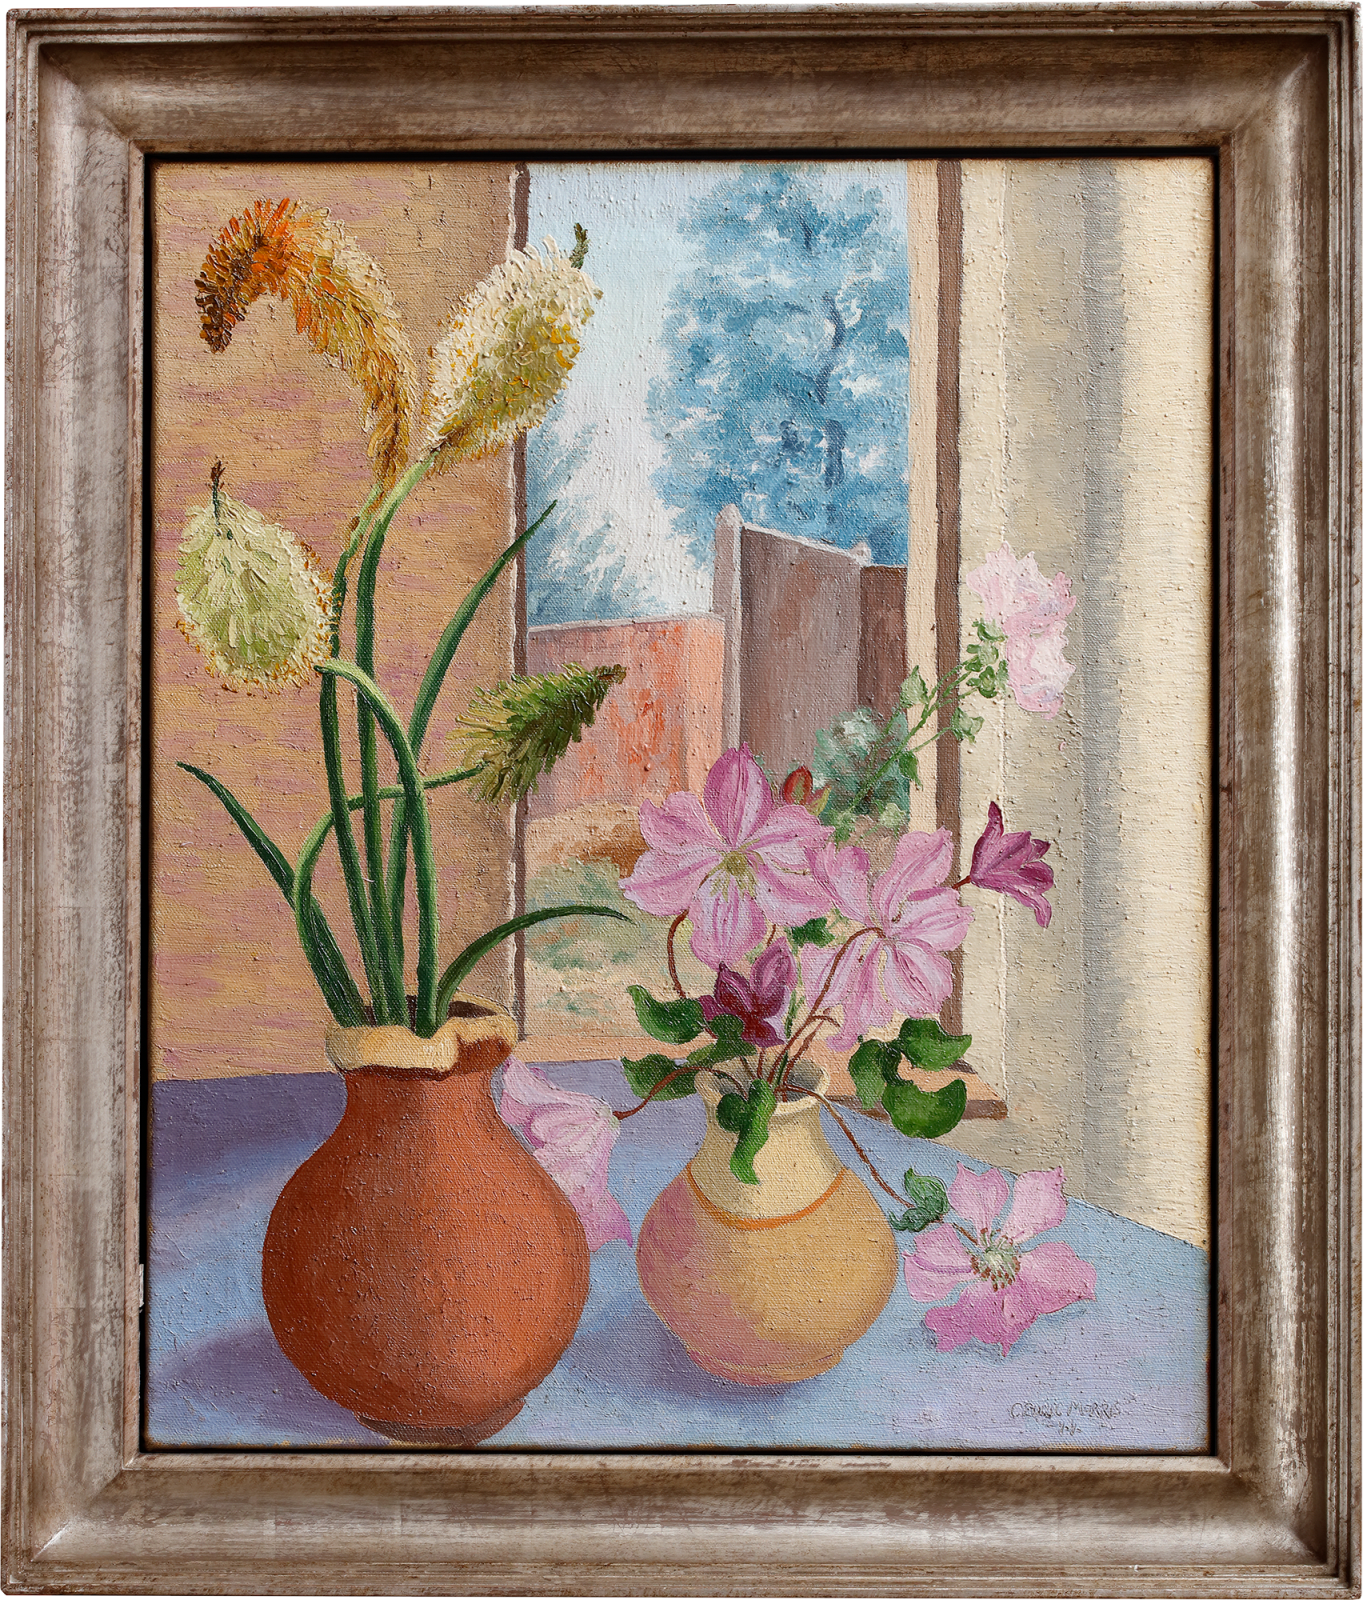 Signed and dated 'Cedric Morris/44' lower right  Oil on canvas  28 3/4 x 24 1/8 in. (73 x 61 cm)